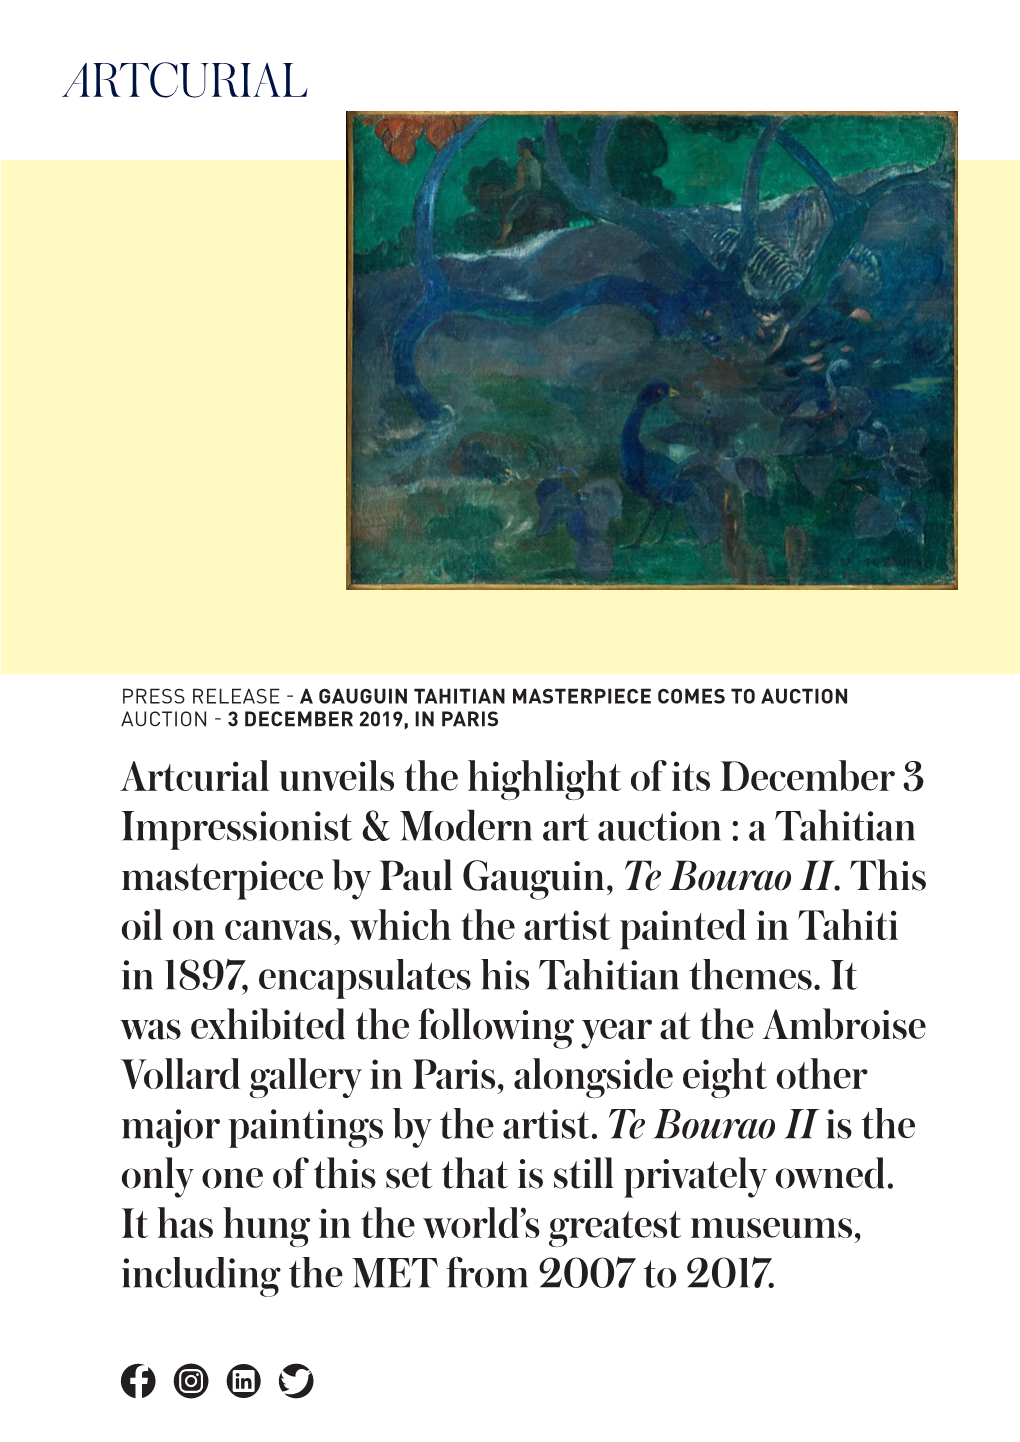 A Gauguin Tahitian Masterpiece Comes to Auction | 3.12